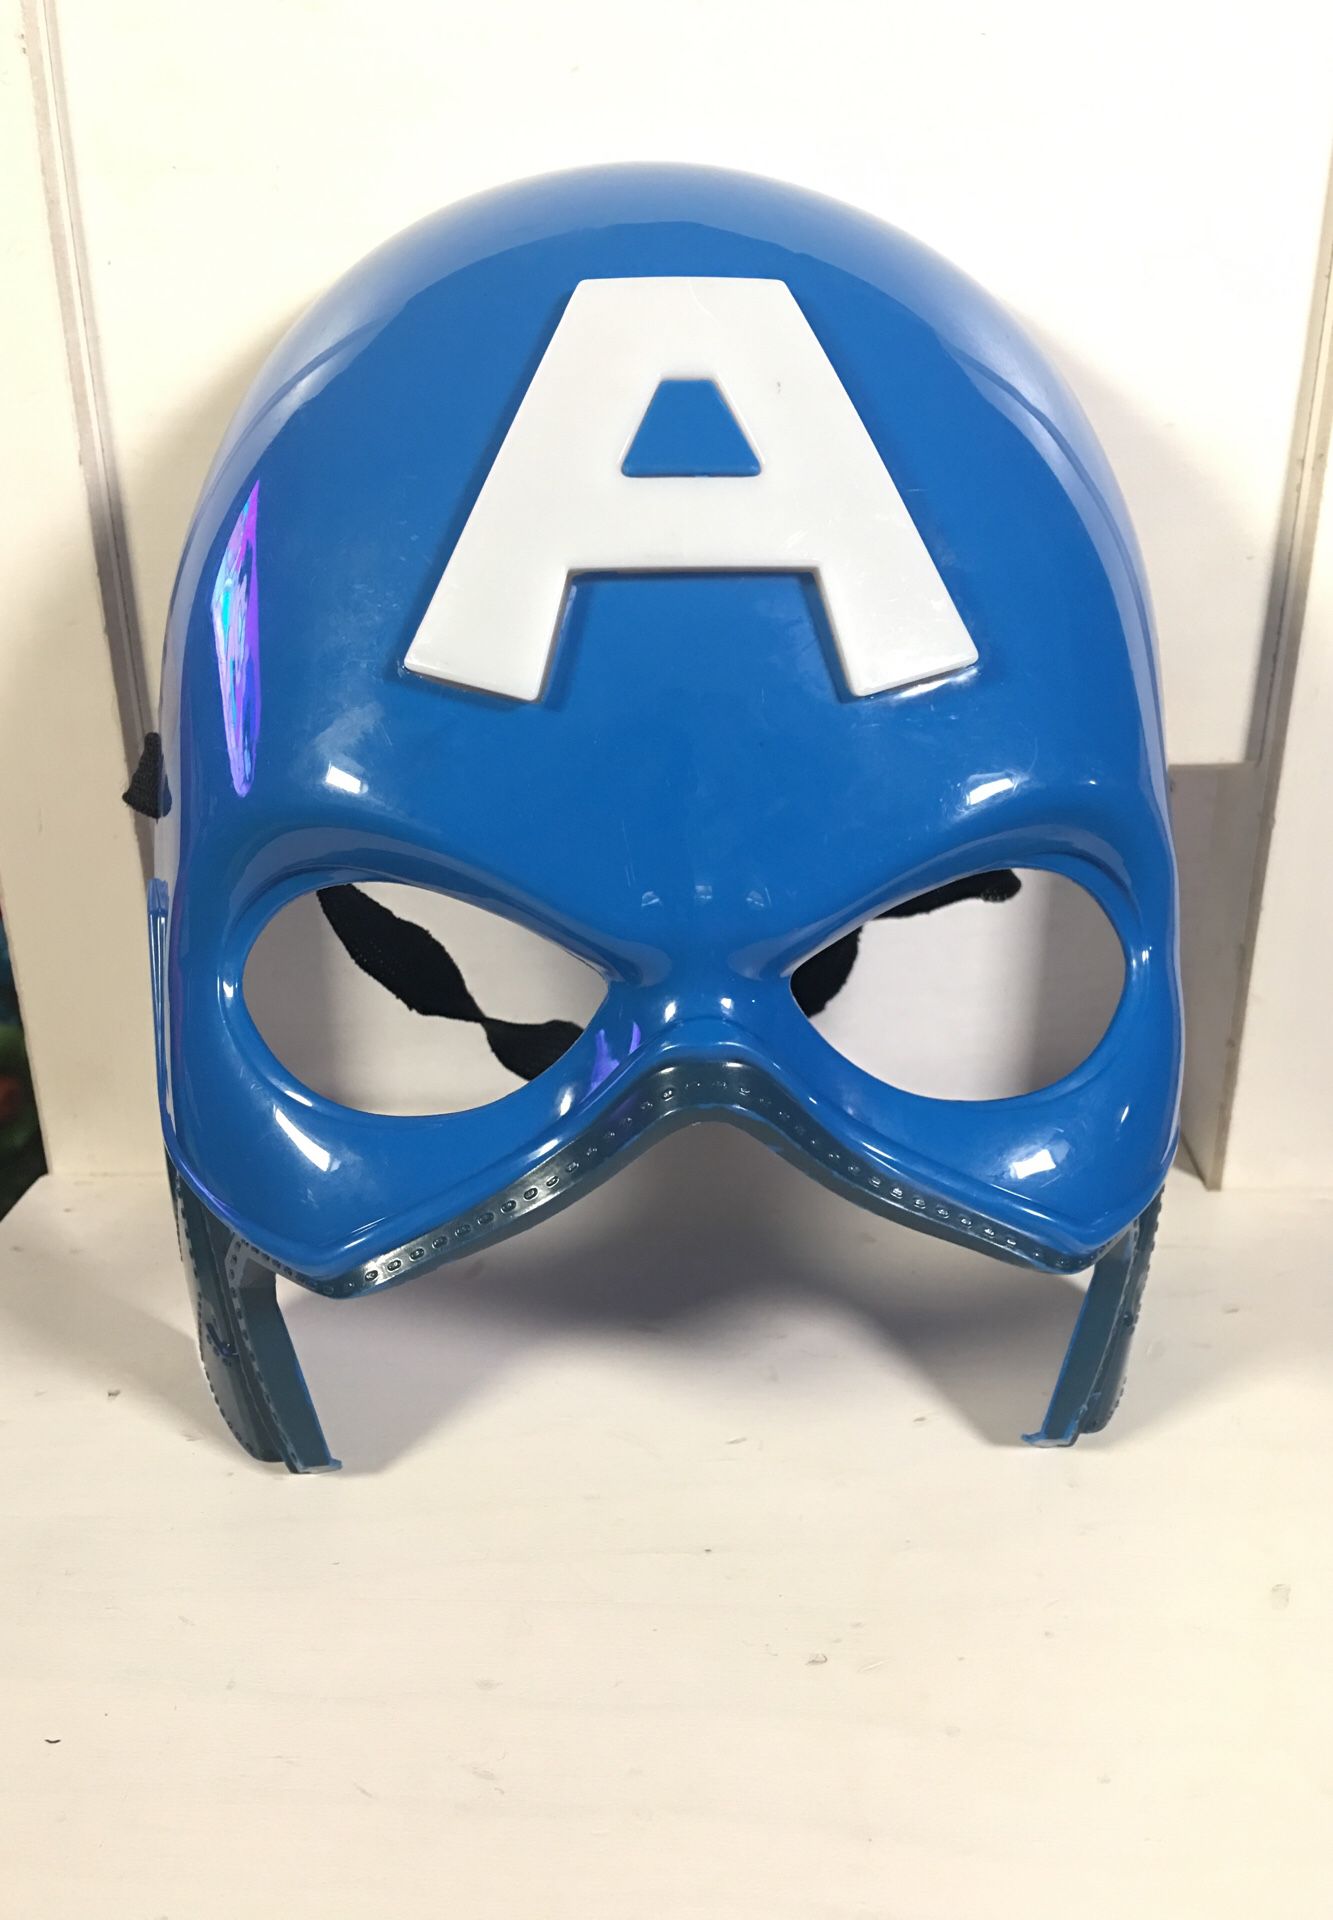 Toy captain America mask